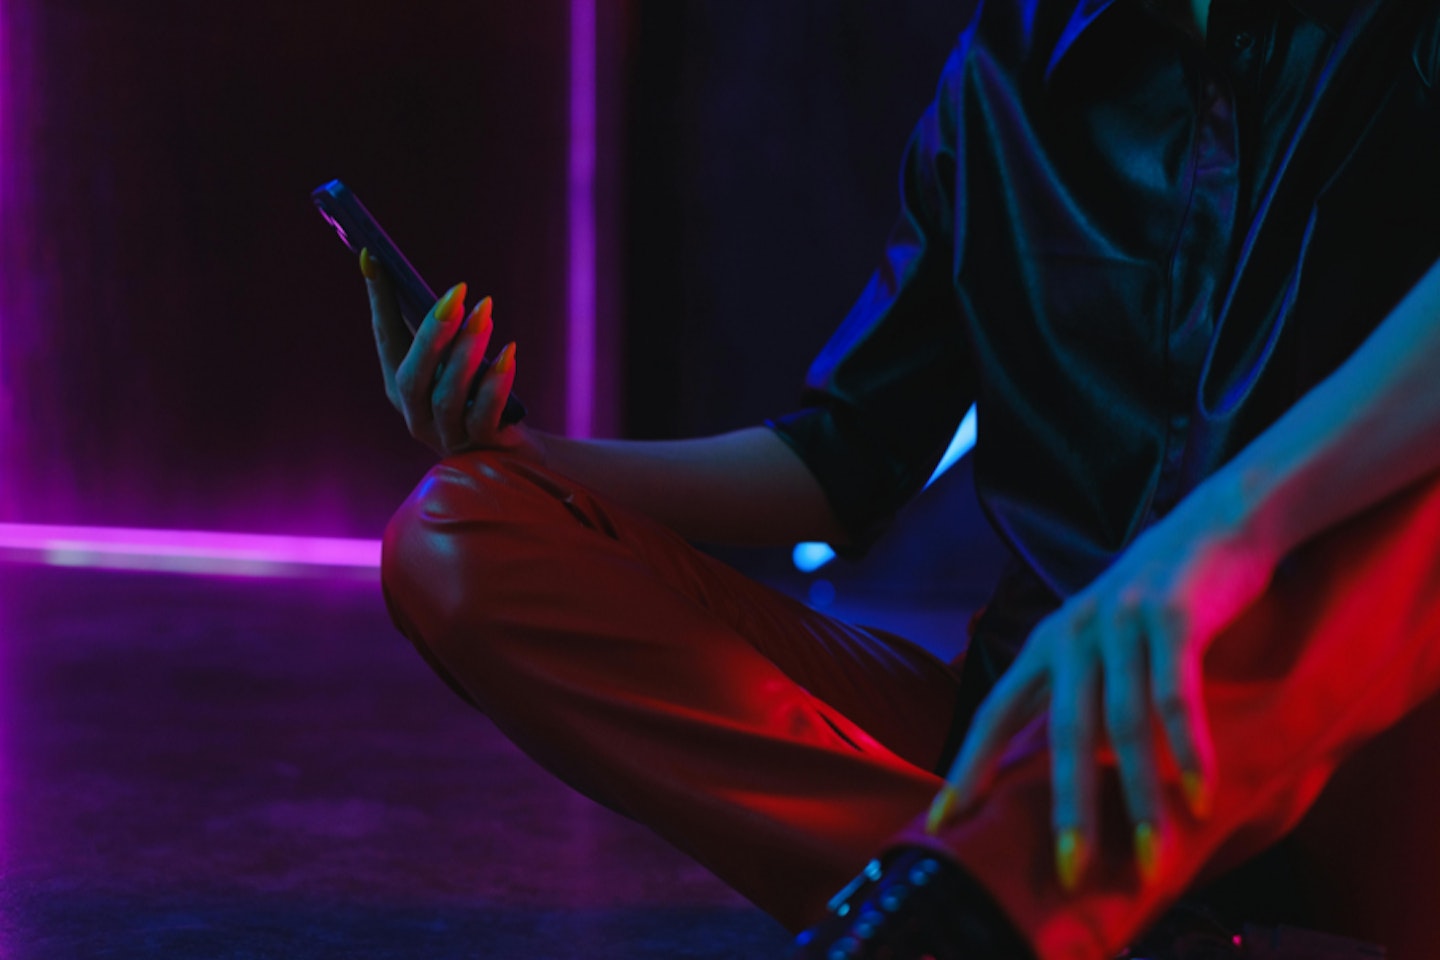 Person sitting down using a phone in a neon room